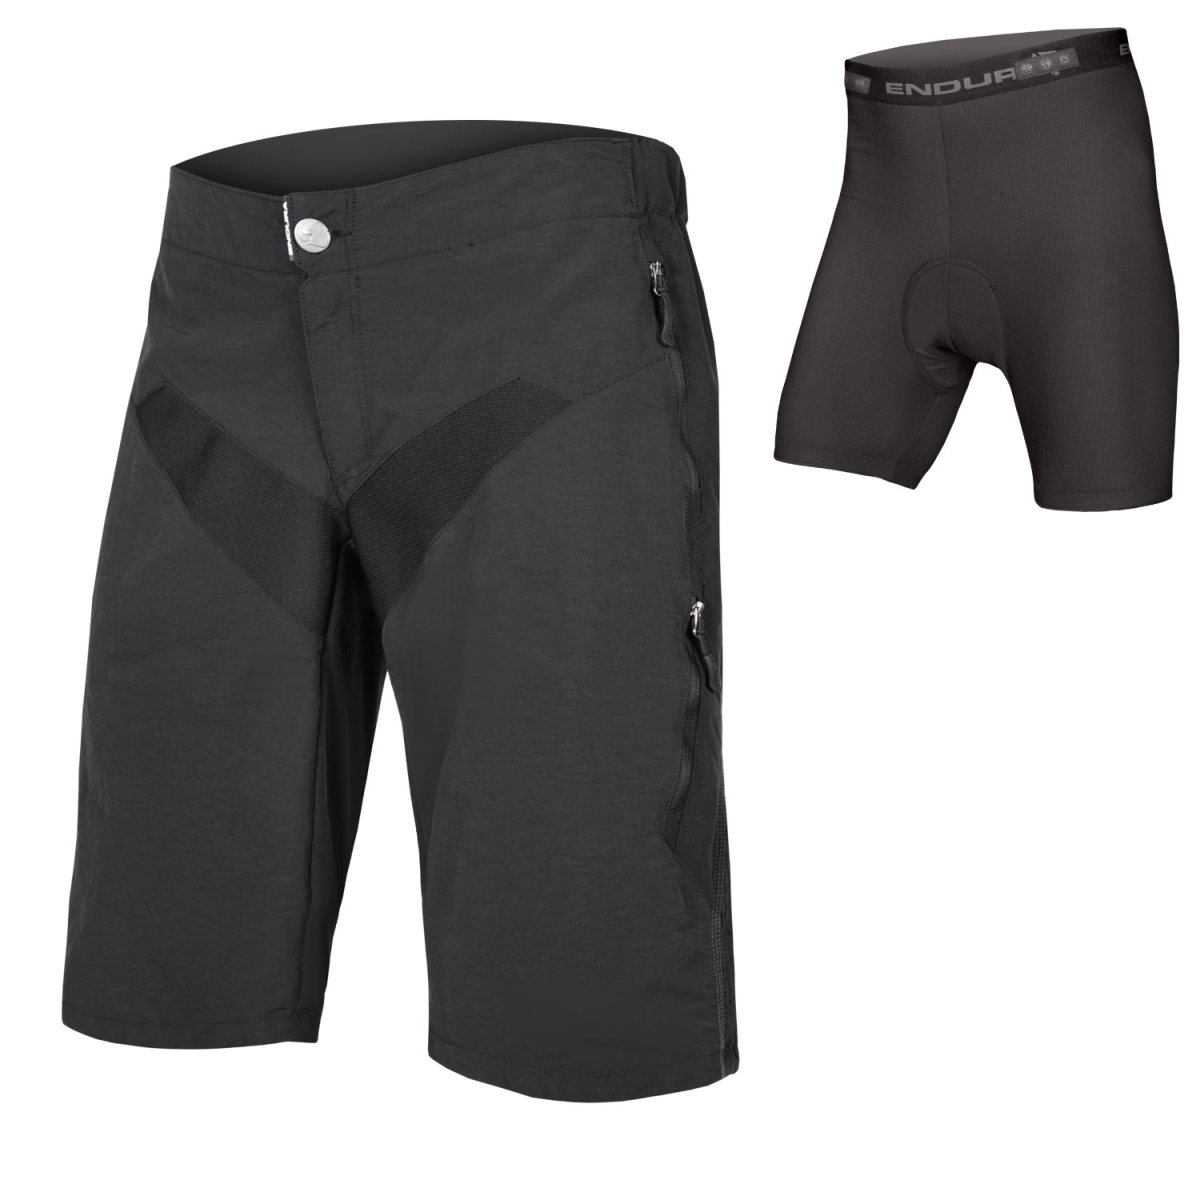 Endura SingleTrack Shorts with Liner - Shorts - Cycle SuperStore